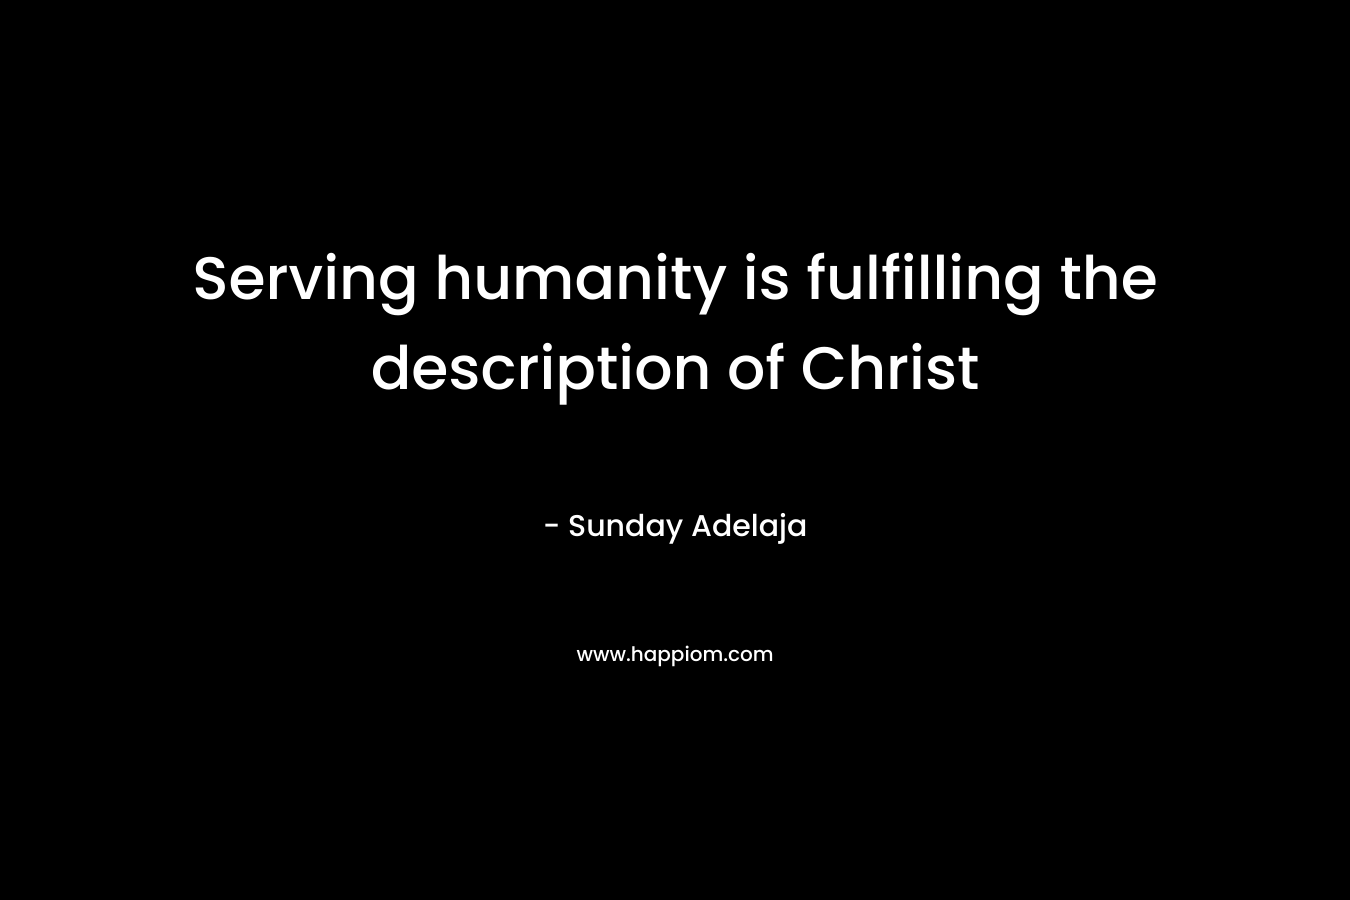 Serving humanity is fulfilling the description of Christ